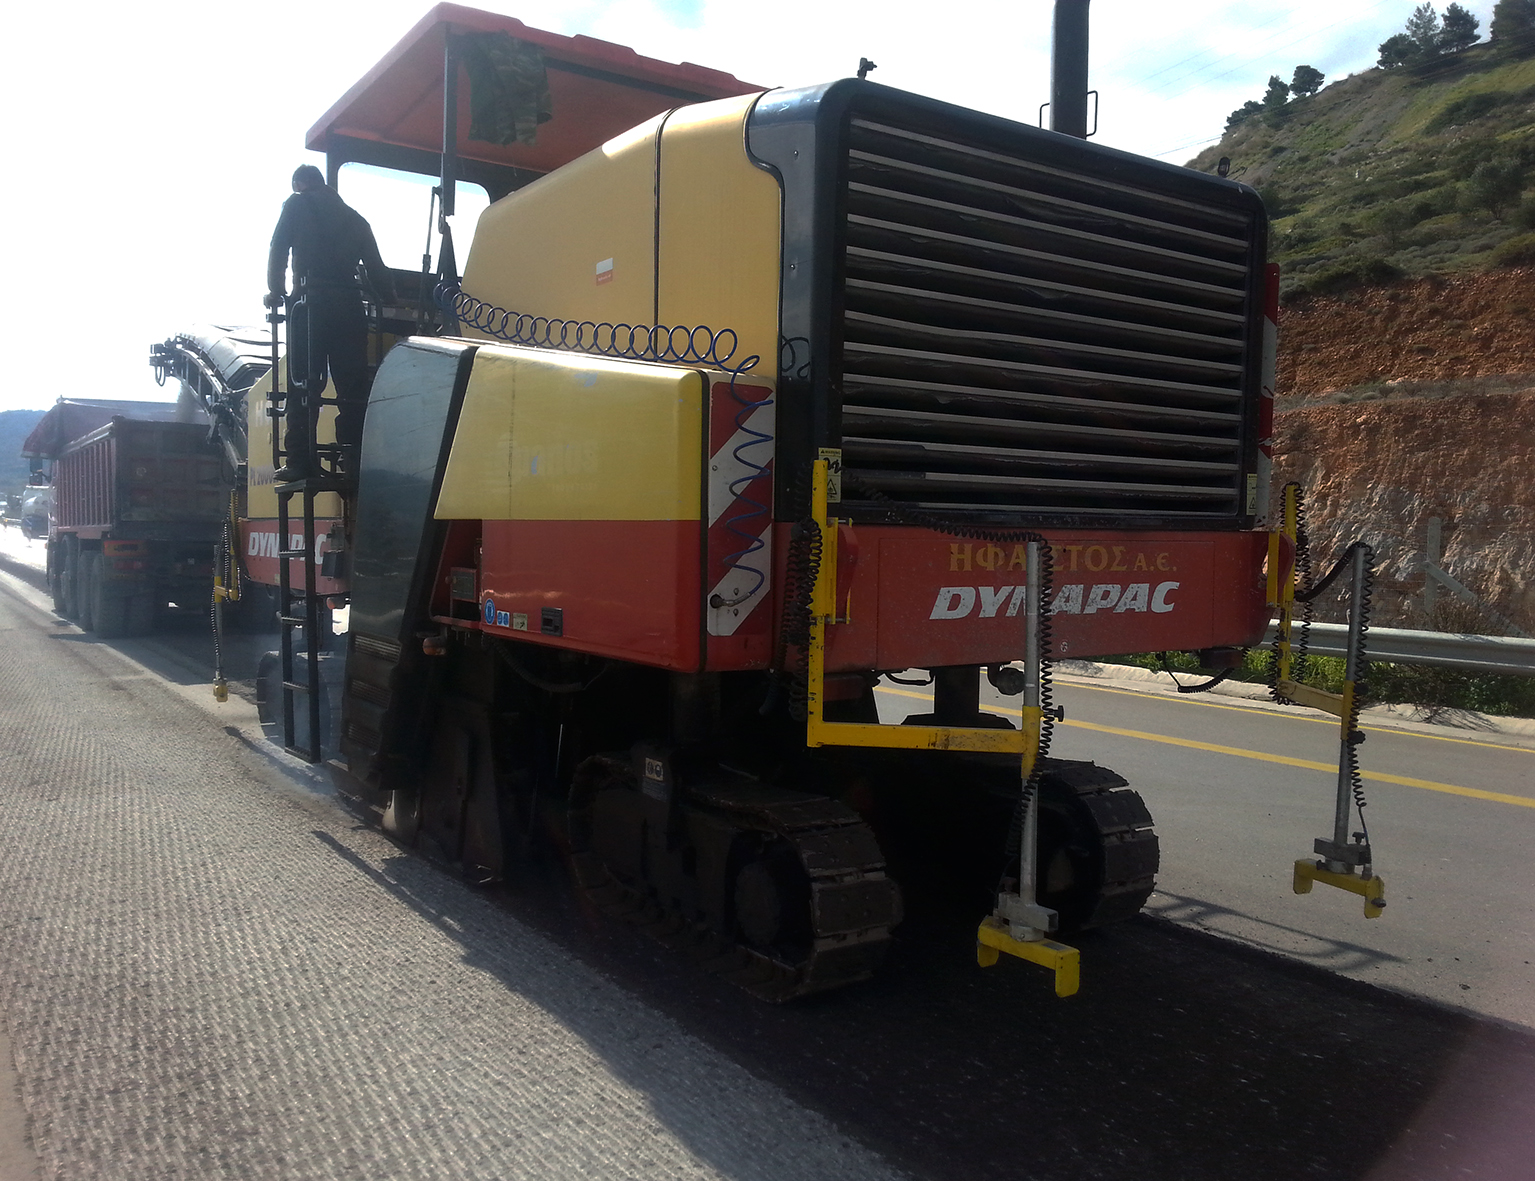 Big Sonic-Ski: Precise levelling, not just with the paver, but